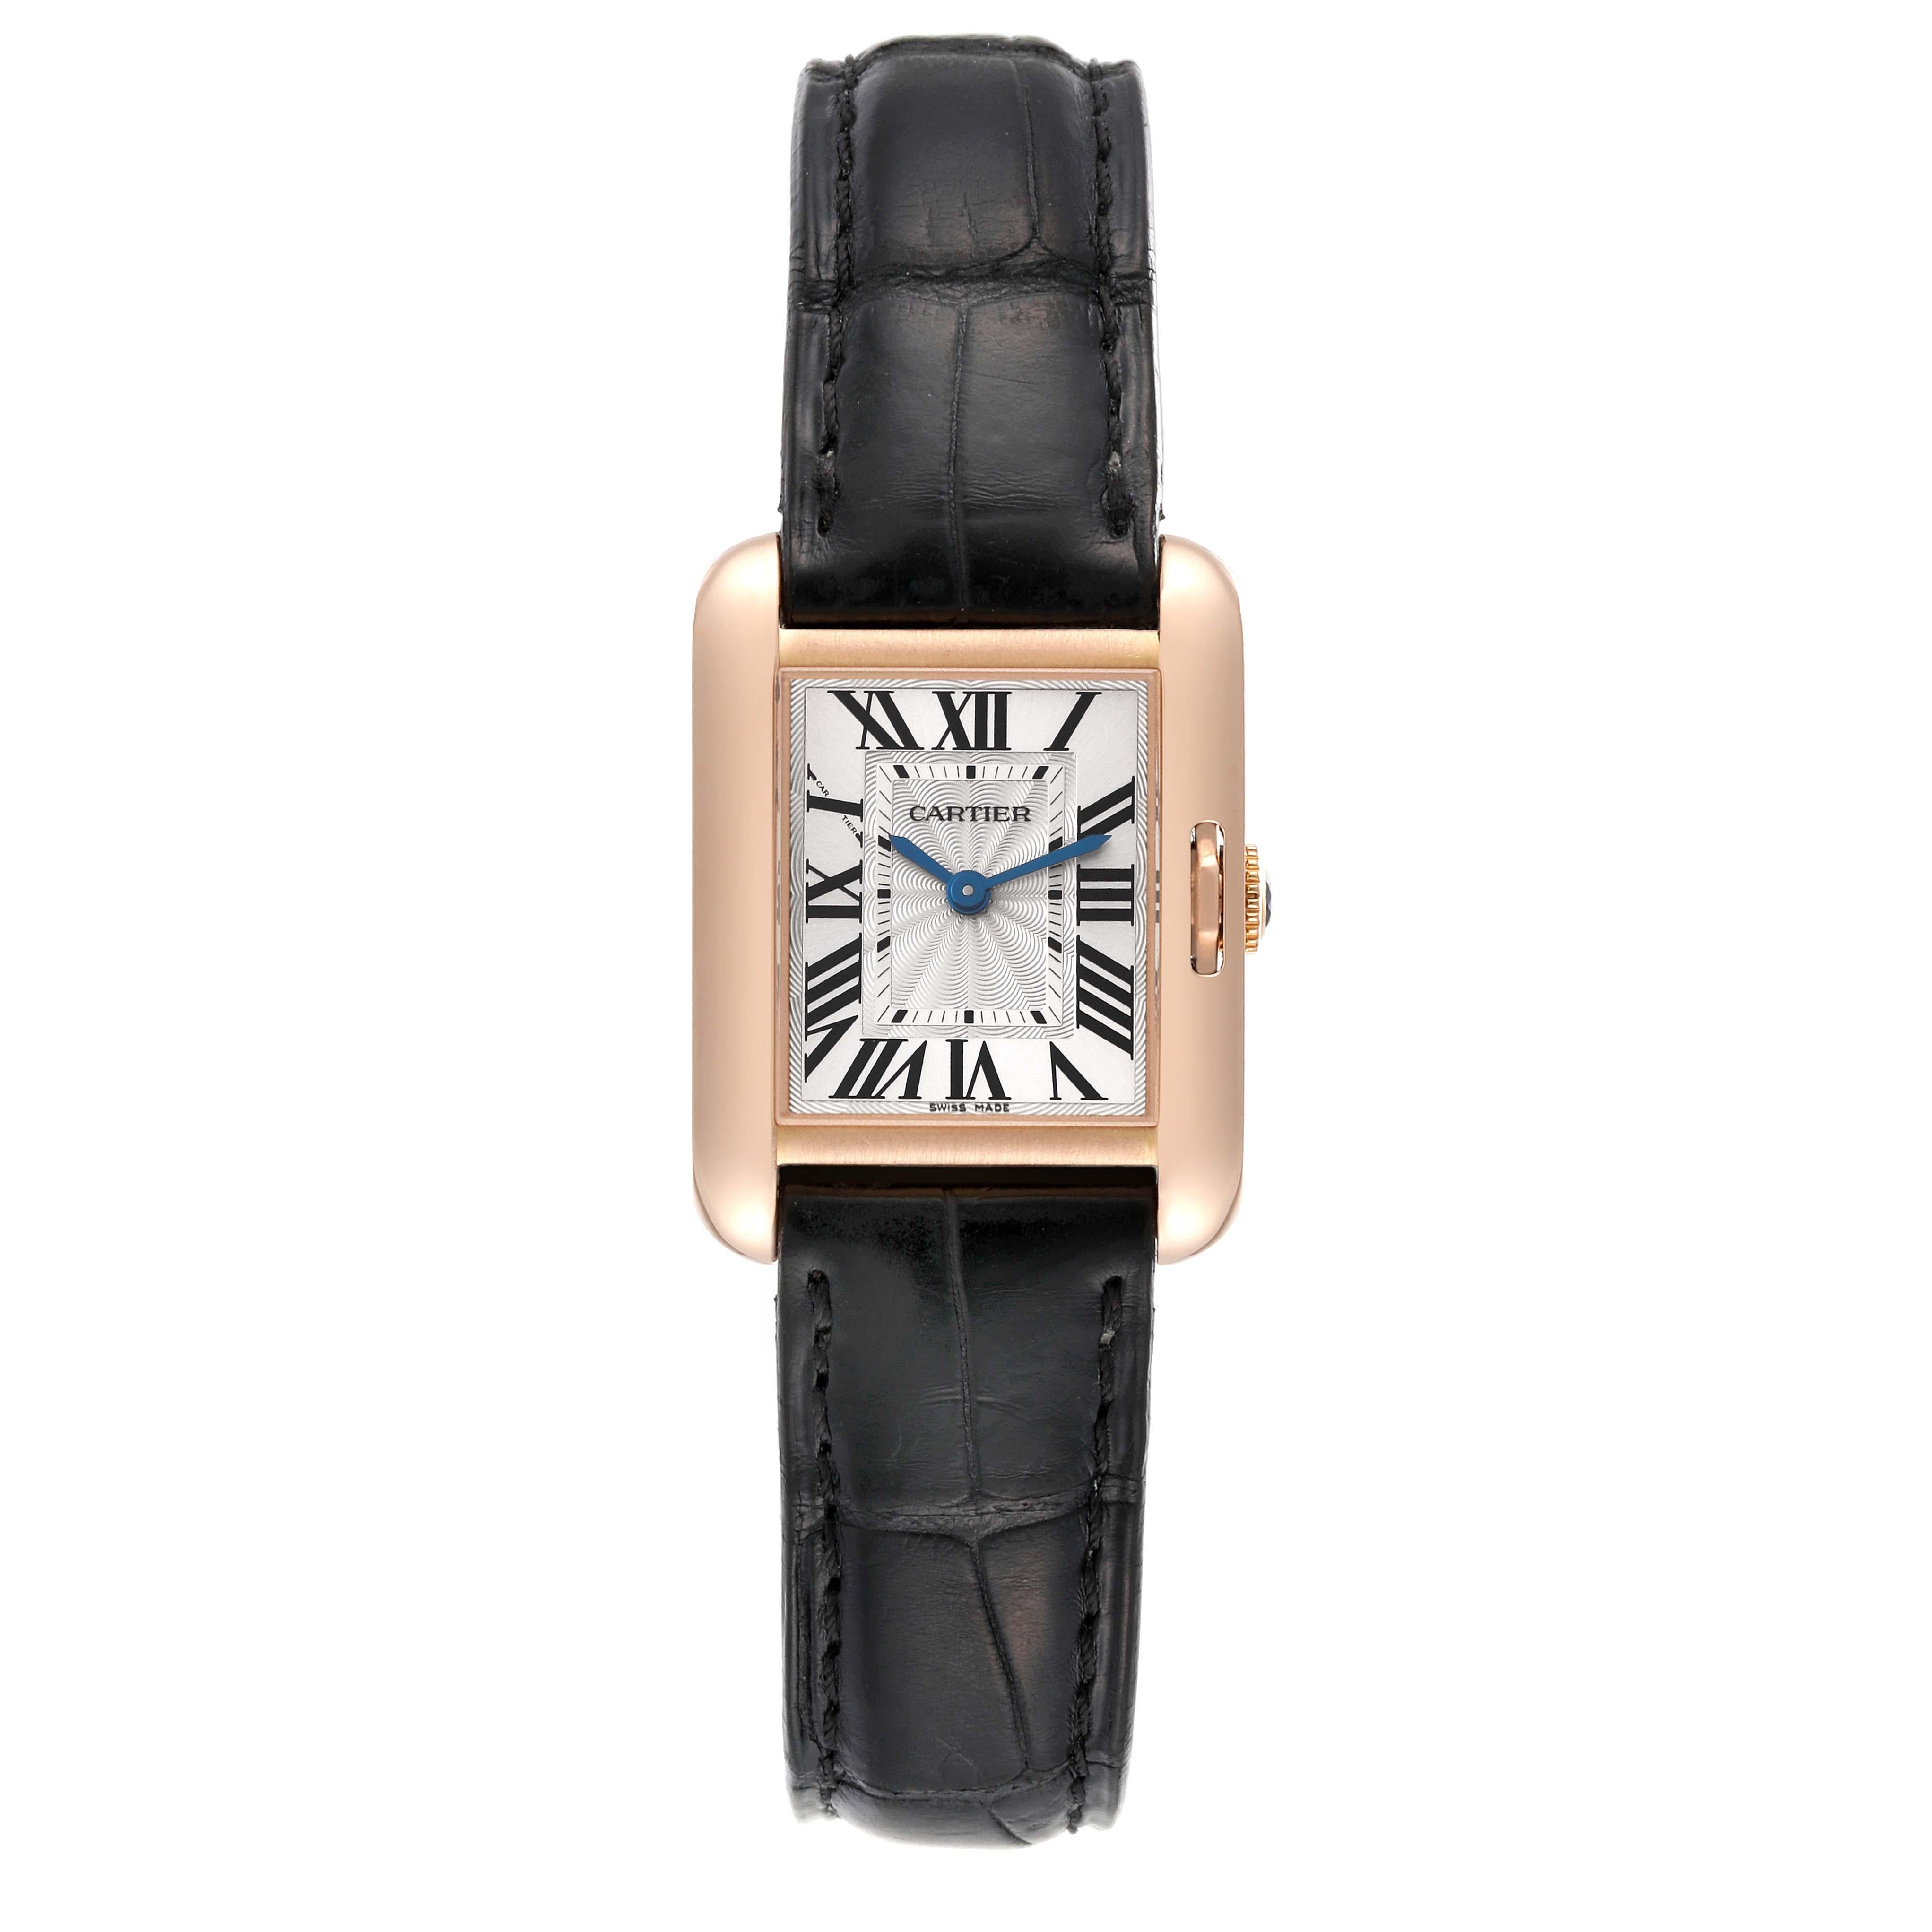 Cartier Tank Anglaise Rose Gold Small Ladies Watch W5310027. Quartz movement. 18K rose gold case 30 x 23 mm. Circular grained crown set with a blue sapphire cabochon. . Scratch resistant sapphire crystal. Flinque silvered dial with Roman numerals.